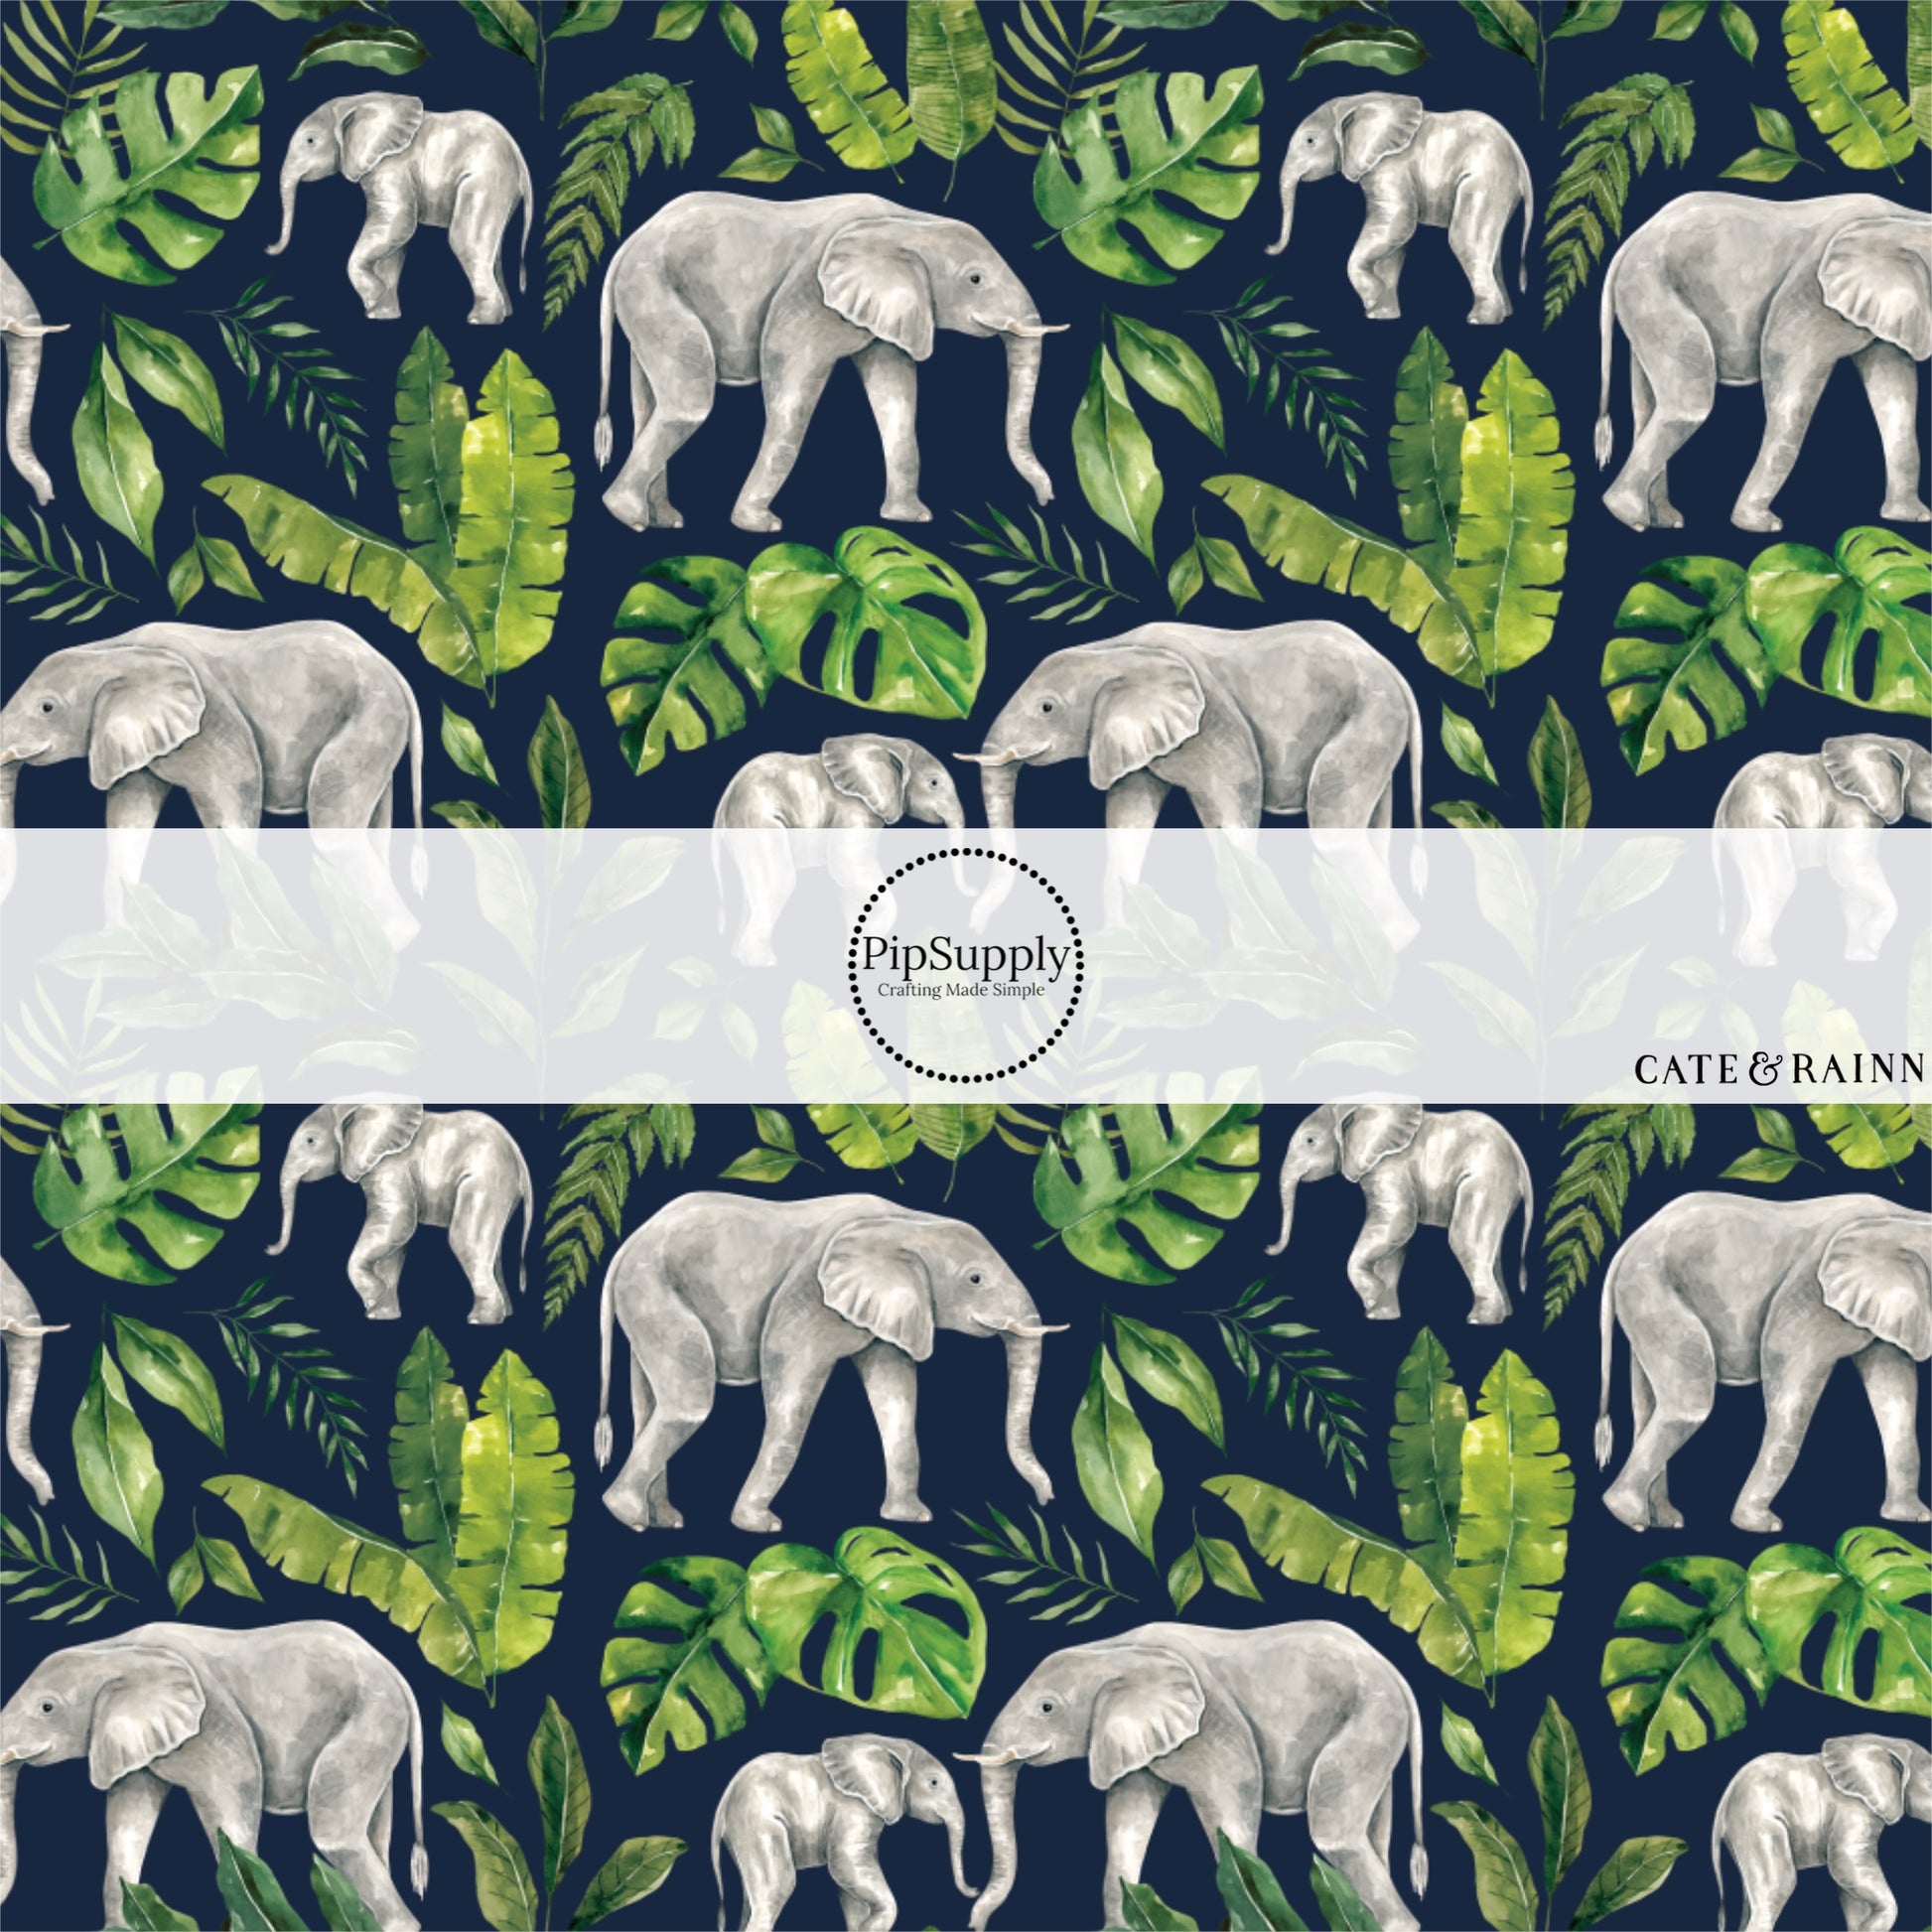 These jungle pattern fabric by the yard features tropical jungle elephant foliage. This fun fabric can be used for all your sewing and crafting needs!